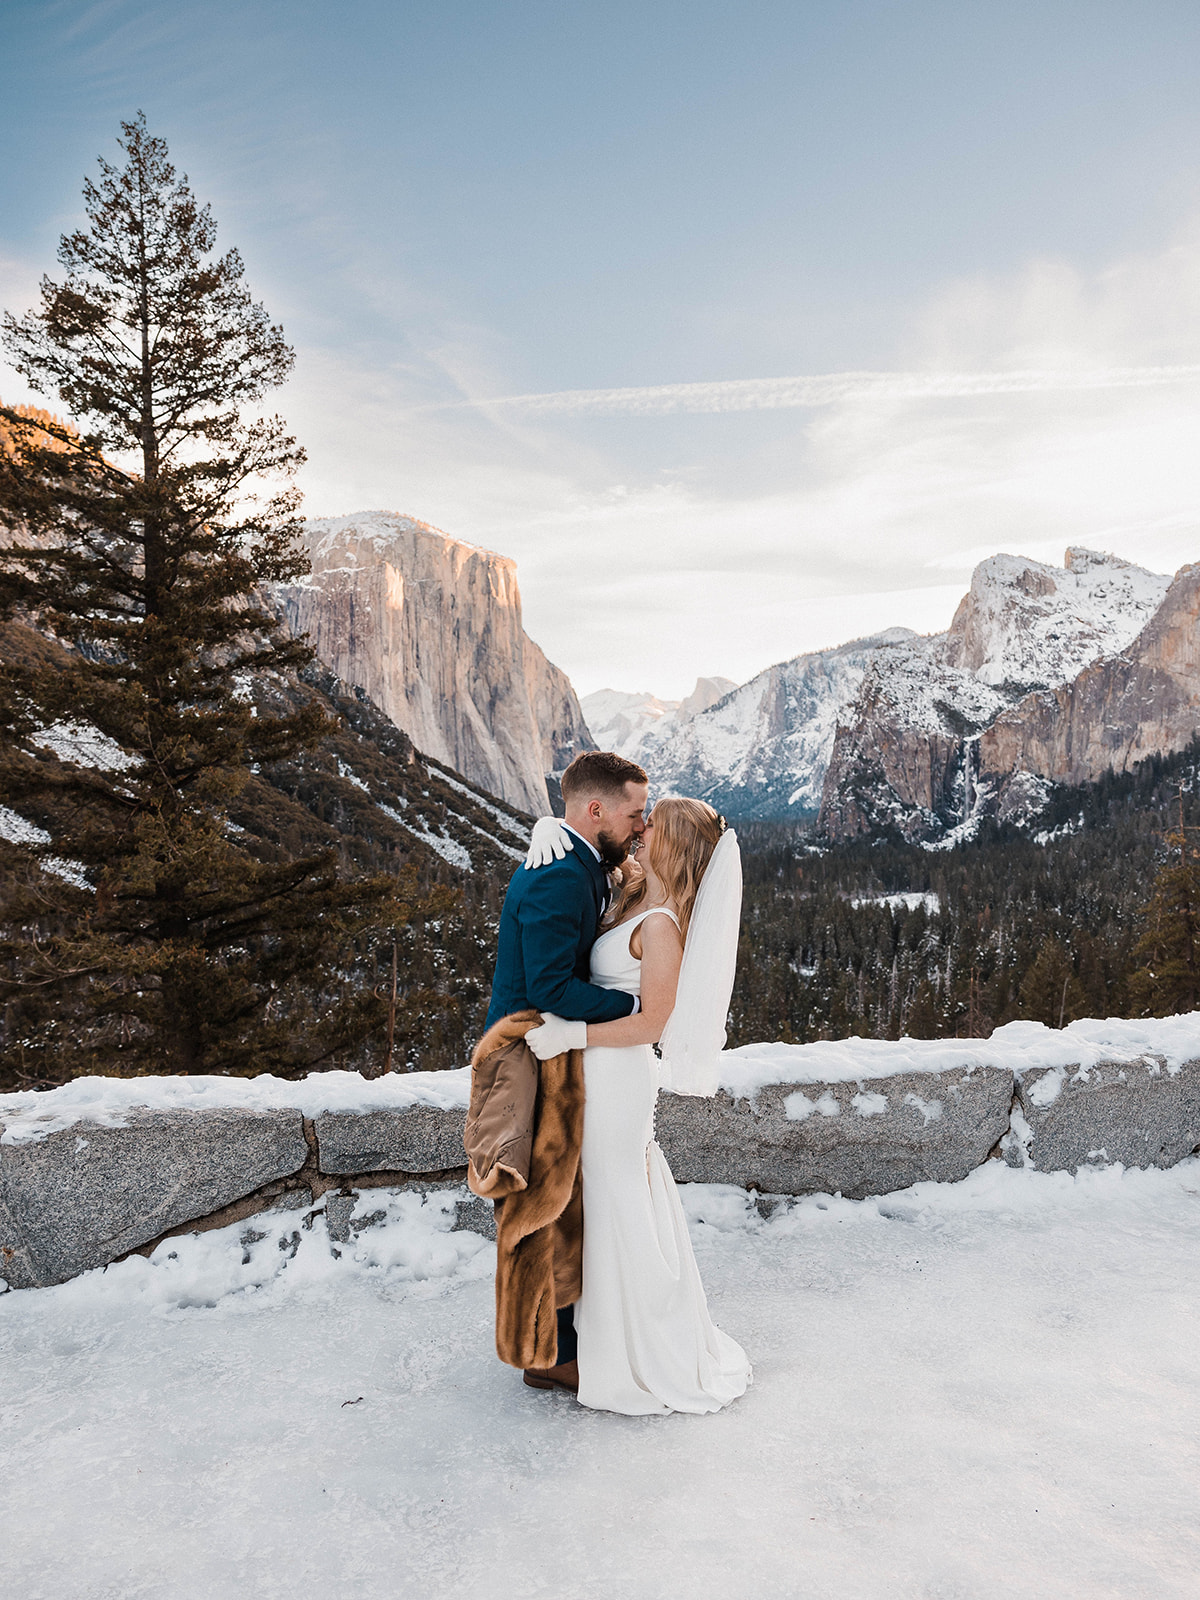 Best Places to Elope In California